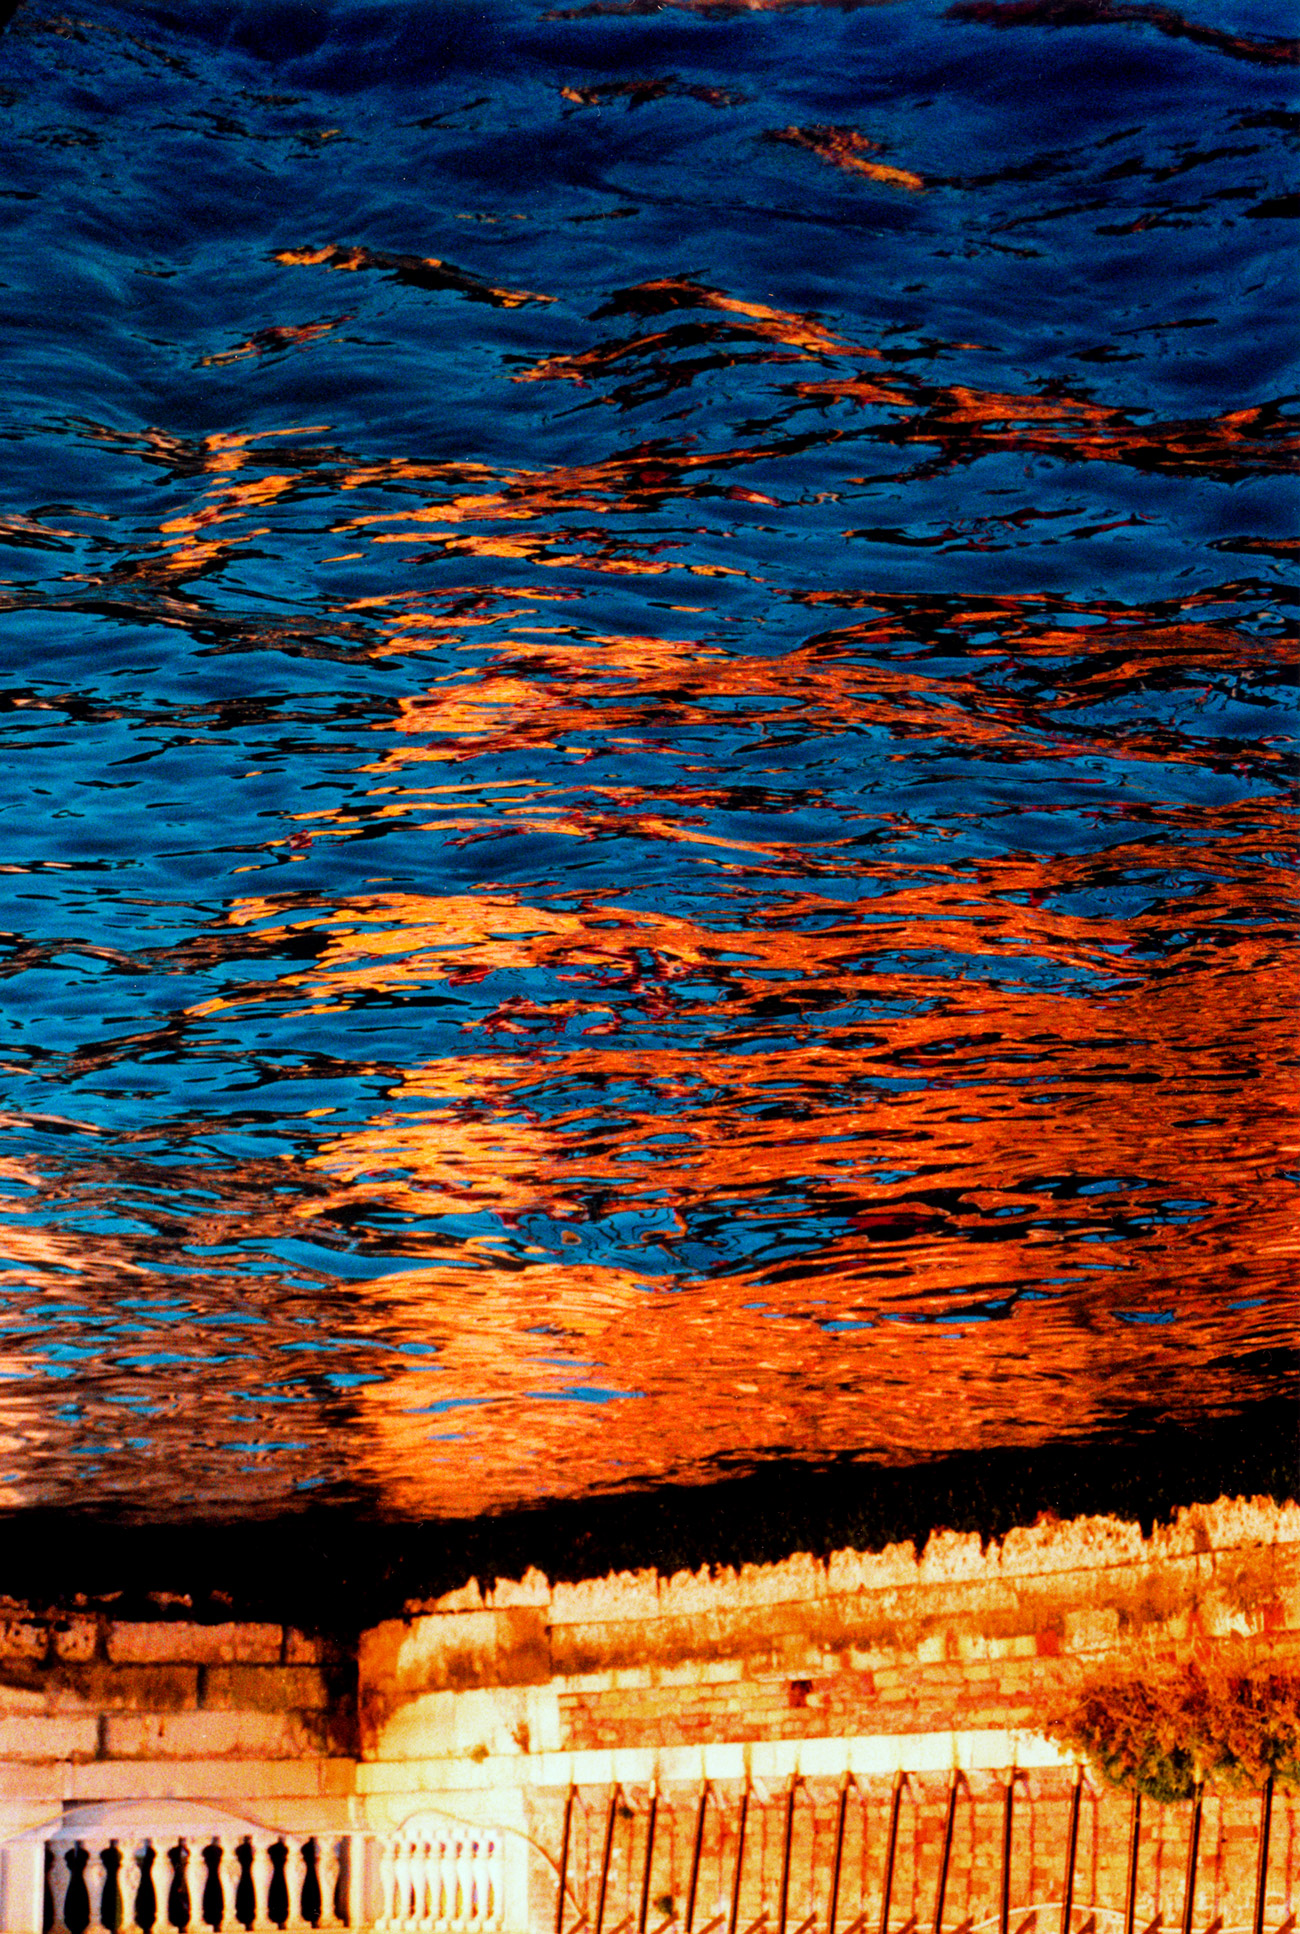 FUOCO FROM REFLECTIONS PHOTOS OF VENICE